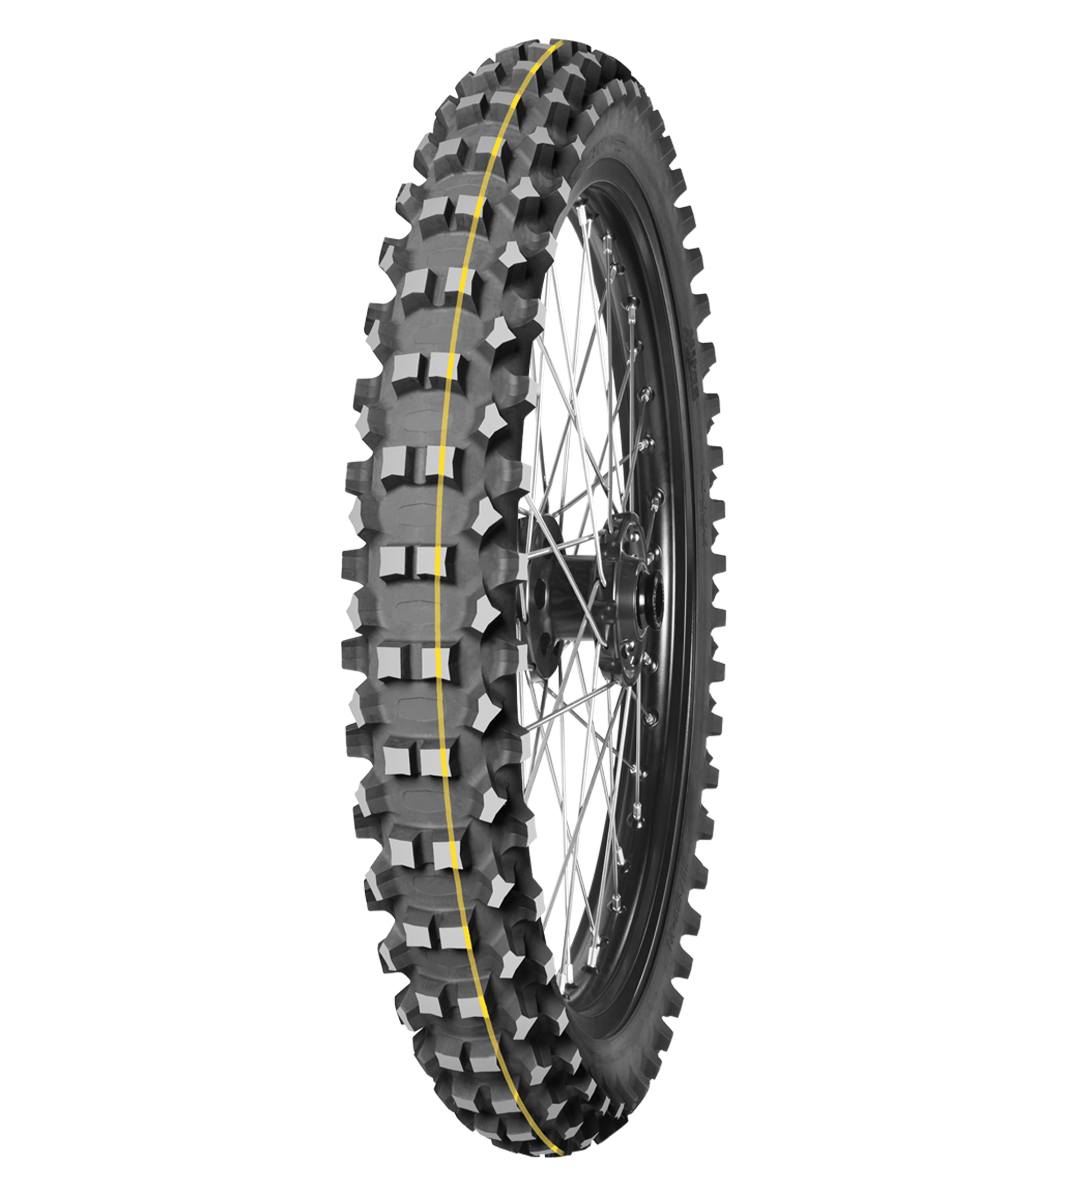 Mitas TERRA FORCE-MX MH 90/100-21 Enduro Competition Off-Road SUPER 57M Yellow Tube Front Tire, 226659, 90/100-21, Enduro Competition, Front, Off-Road, Terra Force, Terra Force-MX MH, Trail, Tires - Imported and distributed in North &amp; South America by Lindeco Genuine Powersports - Premier Powersports Equipment and Accessories for Motorcycle Enthusiasts, Professional Riders and Dealers.